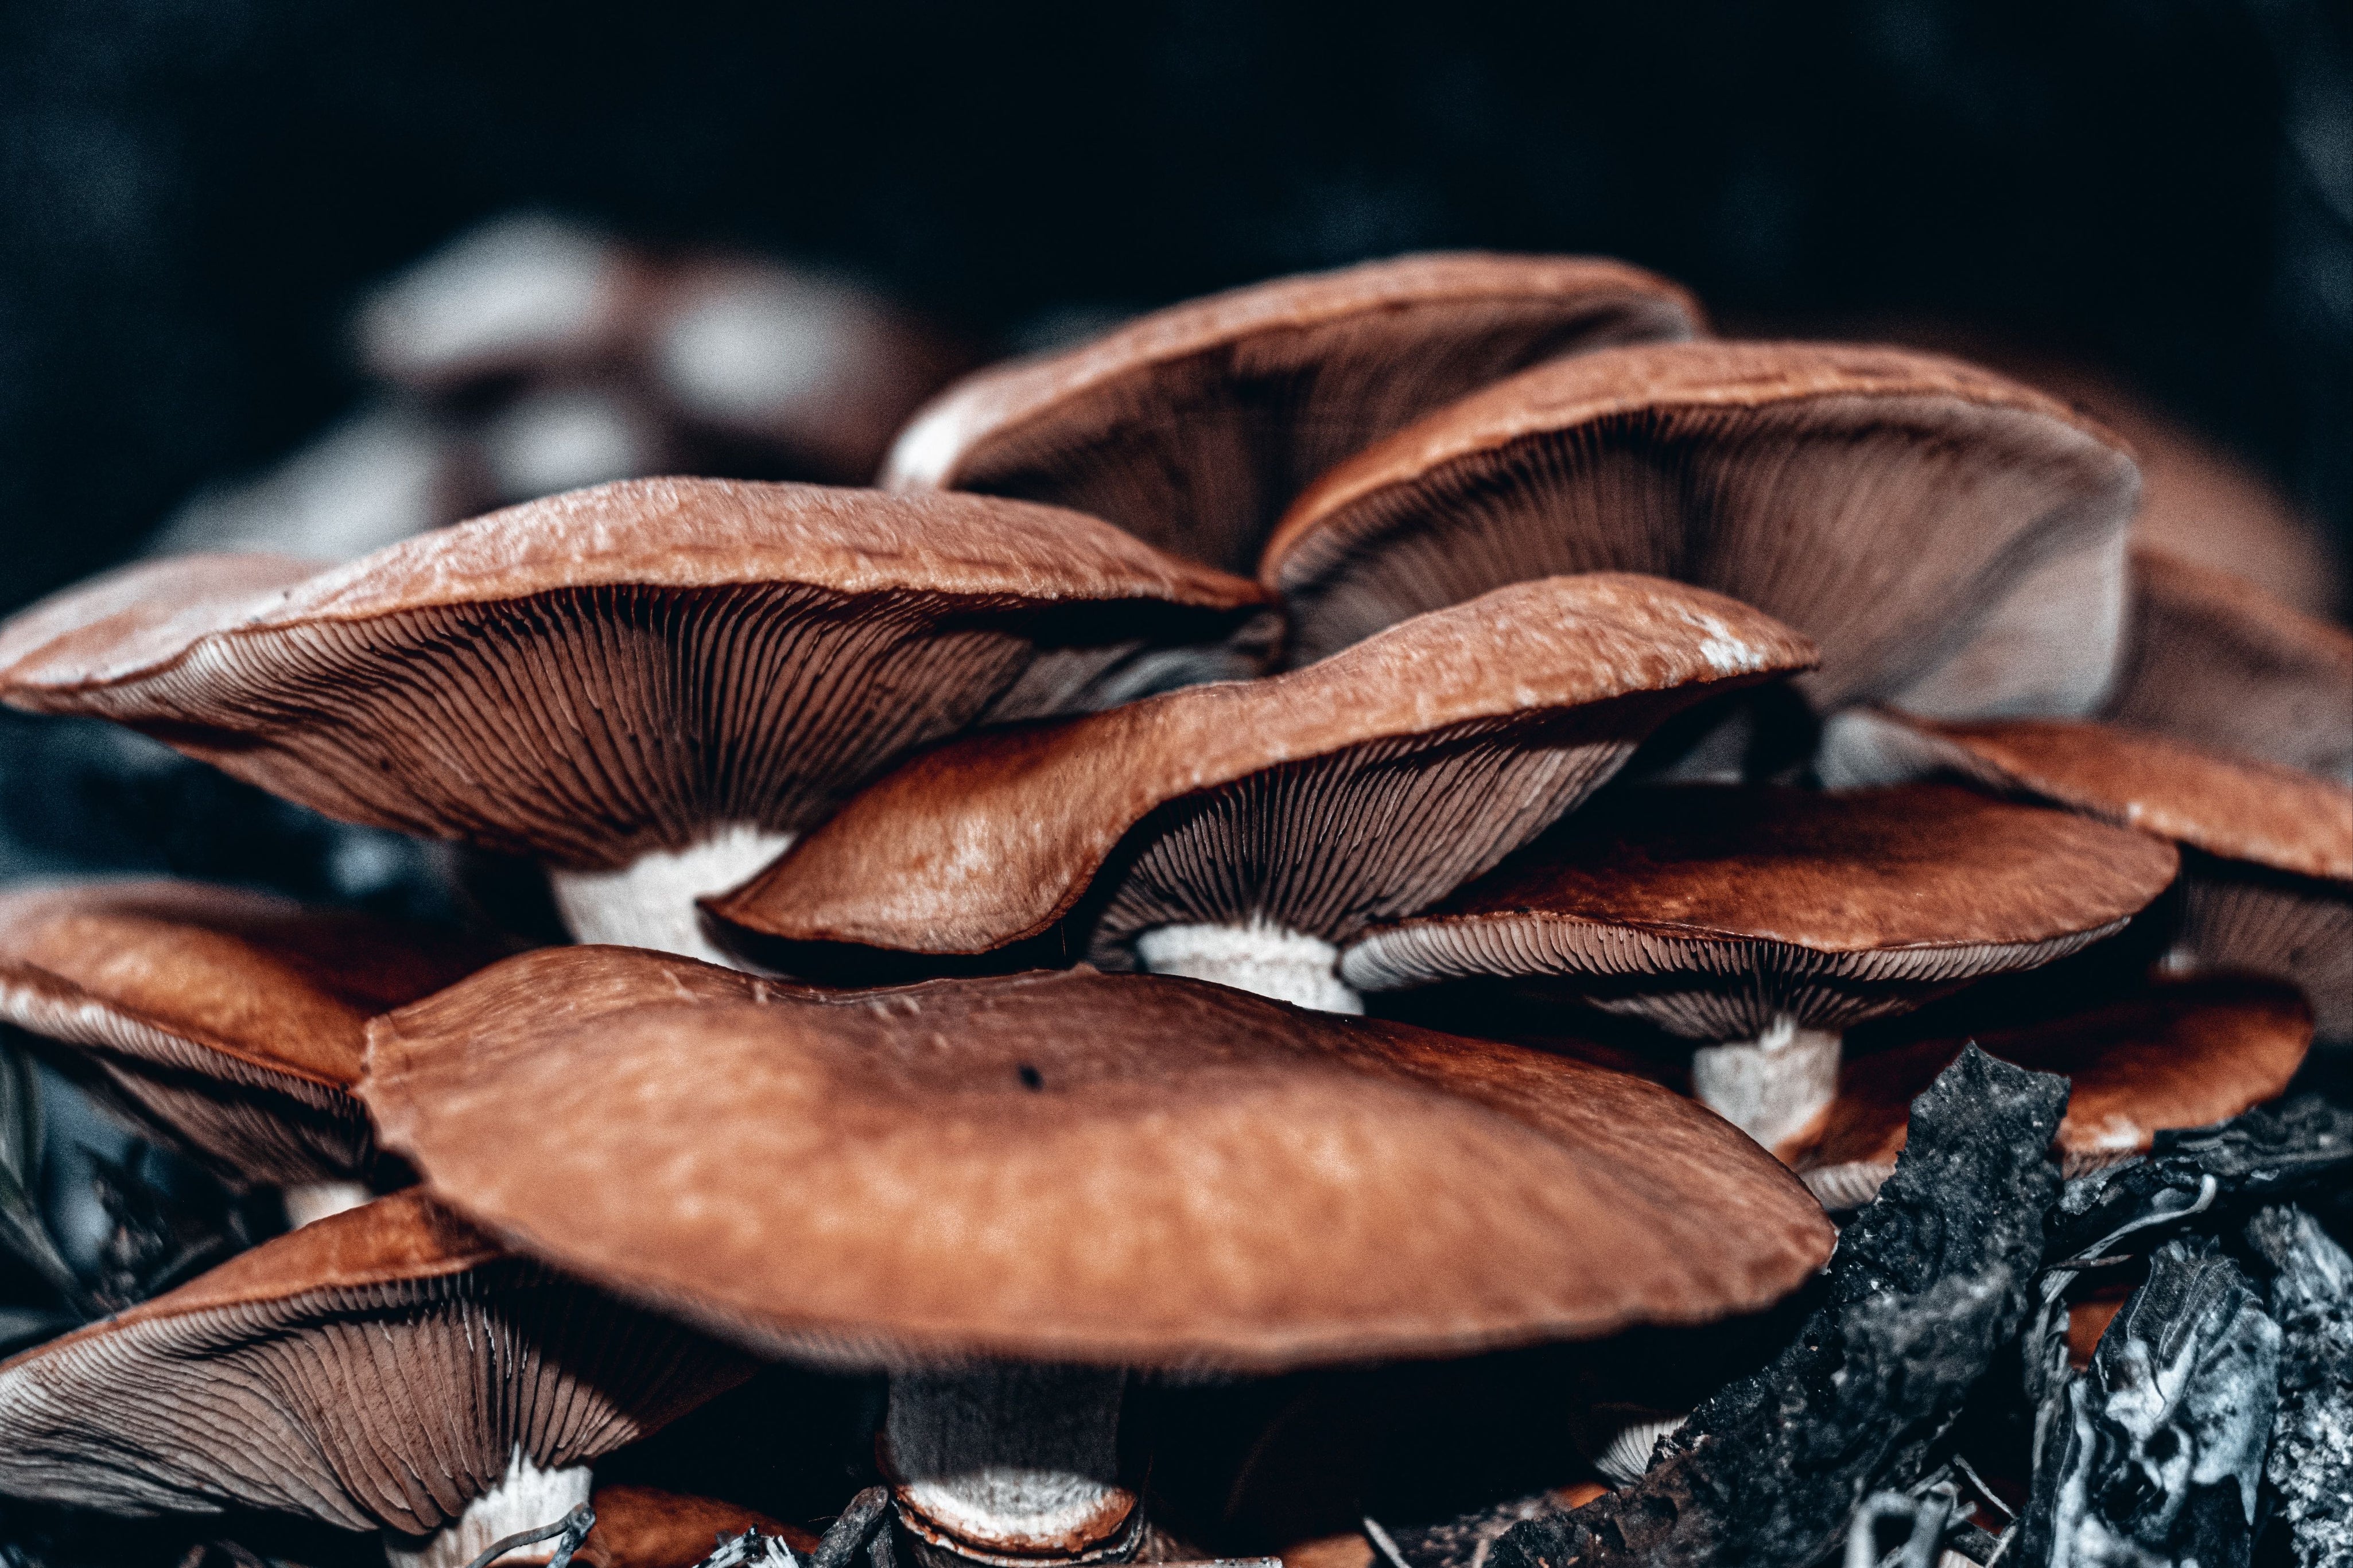 How To Tell If Mushrooms Are Bad: Signs To Look For